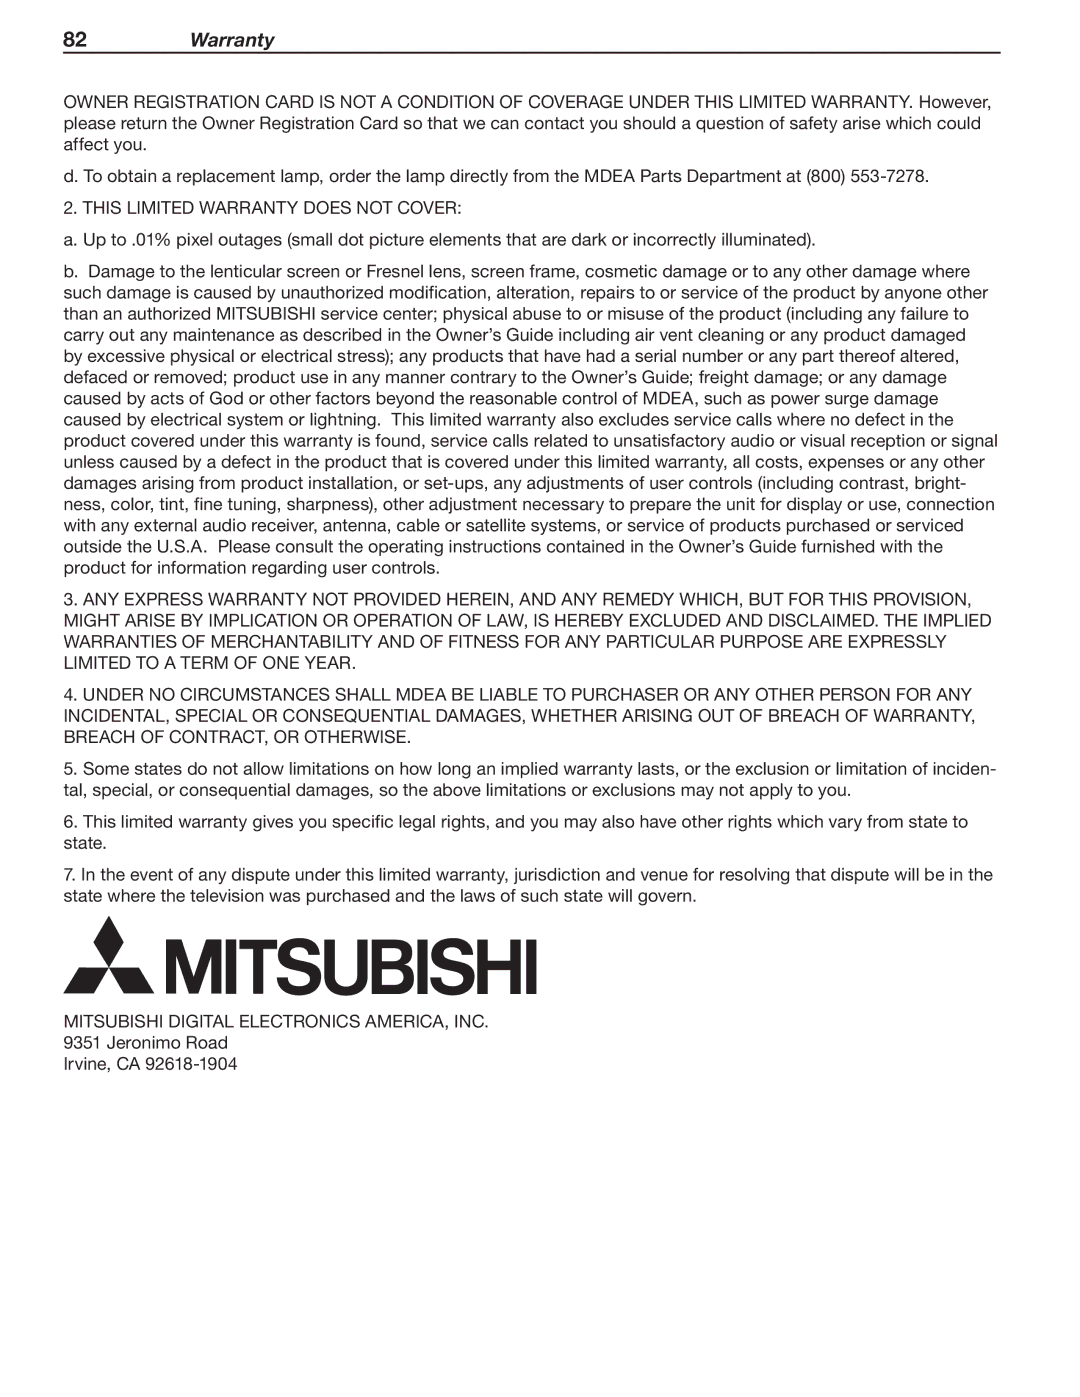 Nikon C9 SERIES, 837 Series, 737 Series This Limited Warranty does not Cover, Mitsubishi Digital Electronics AMERICA, INC 